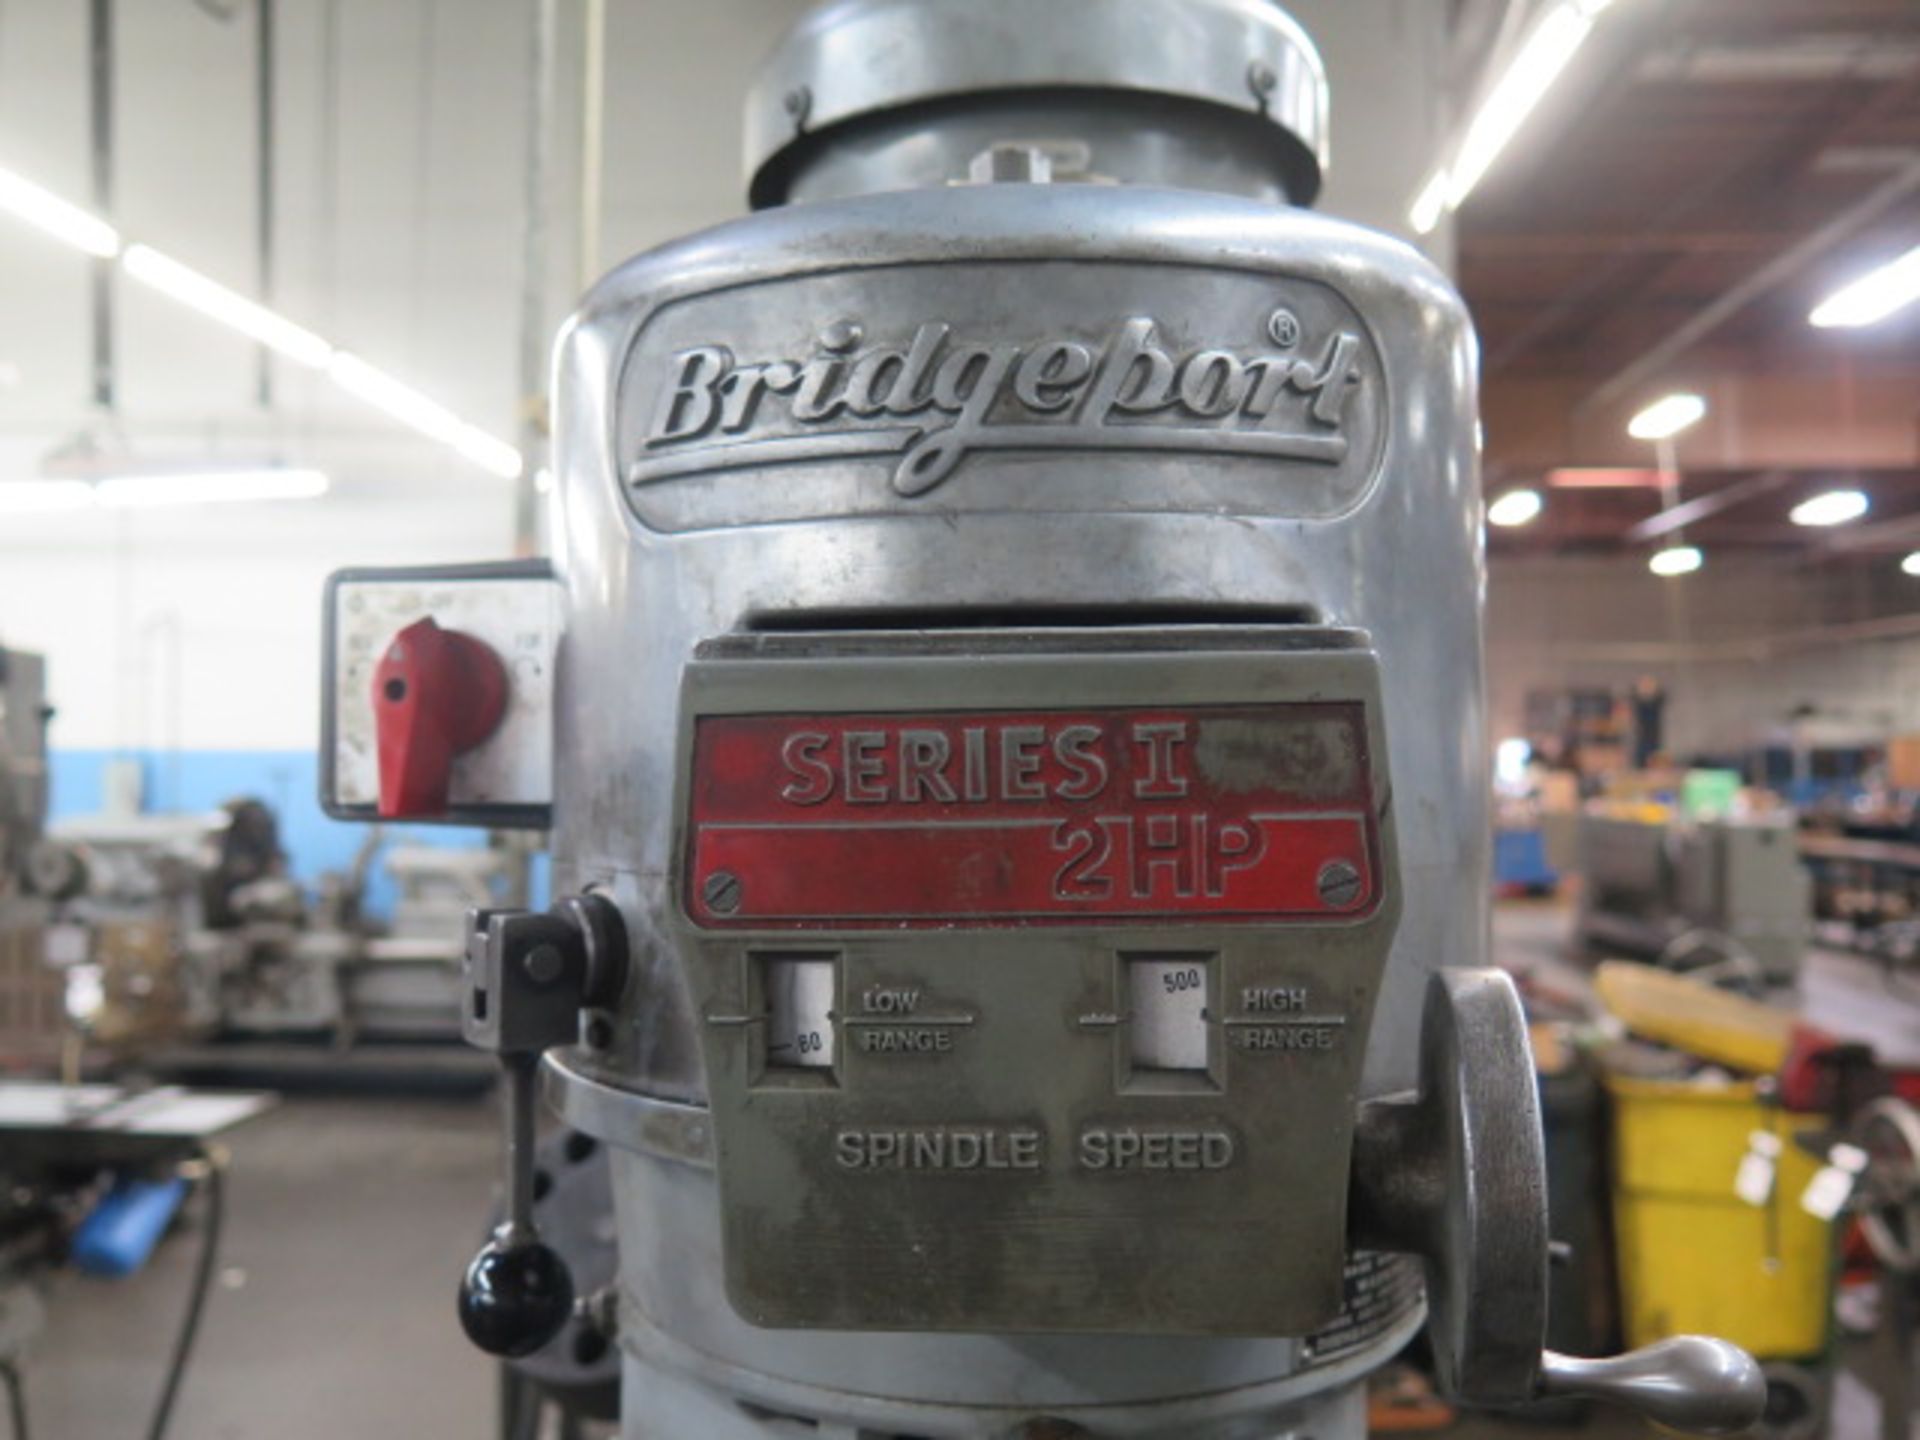 Bridgepoer Series 1 - 2Hp Mill s/n 218799 w/ 60-4200 Dial Change RPM, 9" x 42" Table, SOLD AS IS - Image 9 of 9